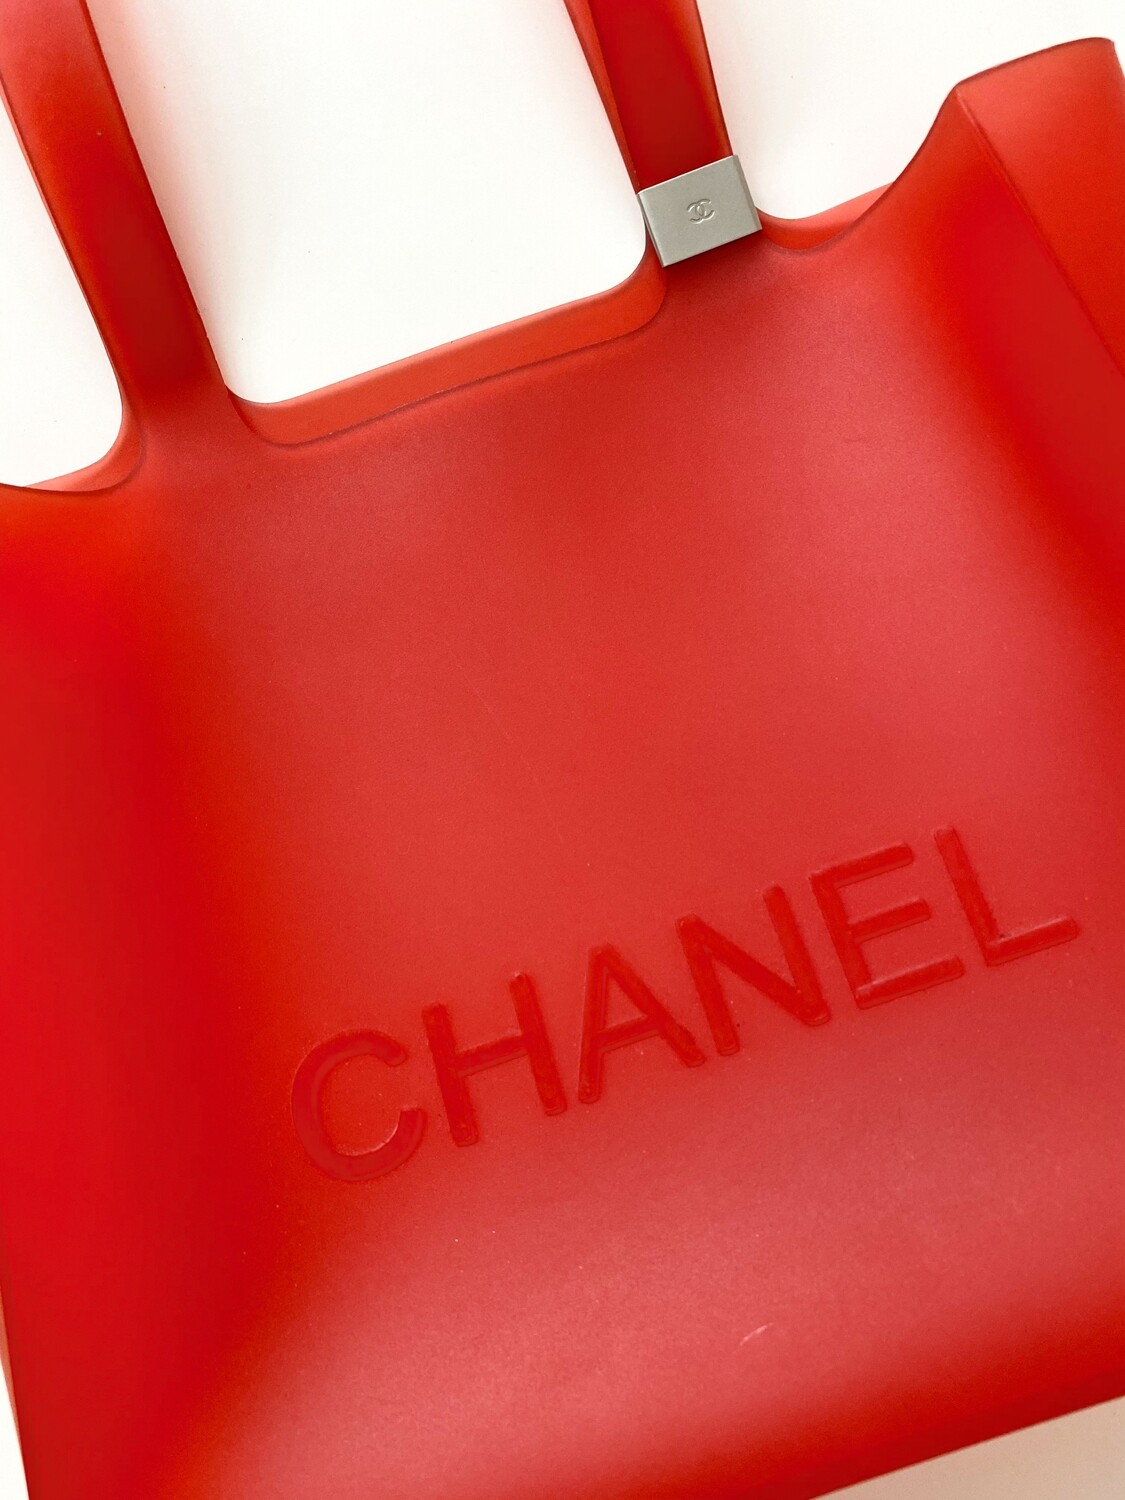 VINTAGE CHANEL LETTER RED JELLY RUBBER TOTE BAG